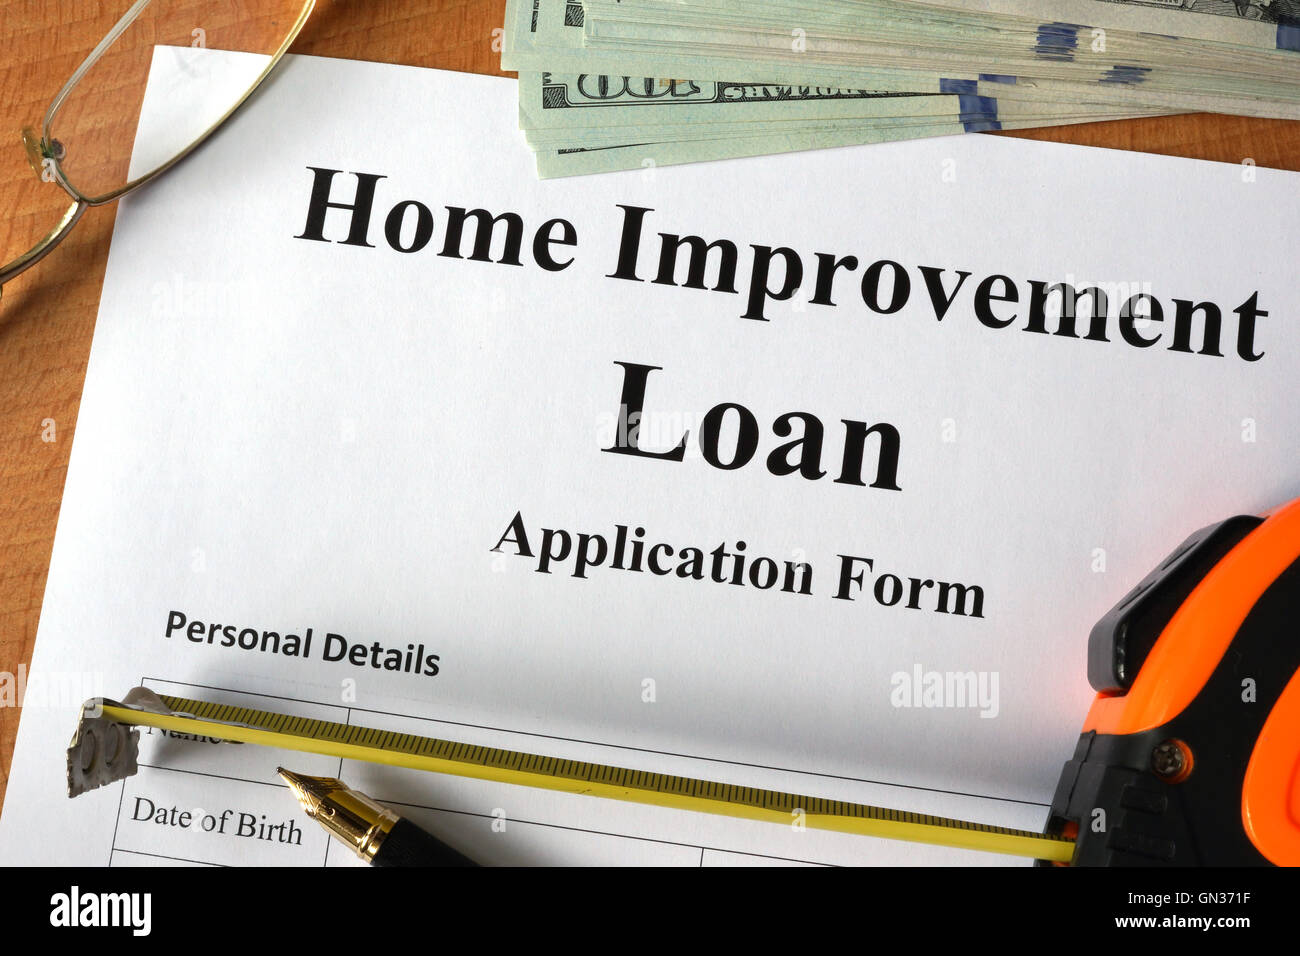 Home improvement loan form on a wooden table. Stock Photo